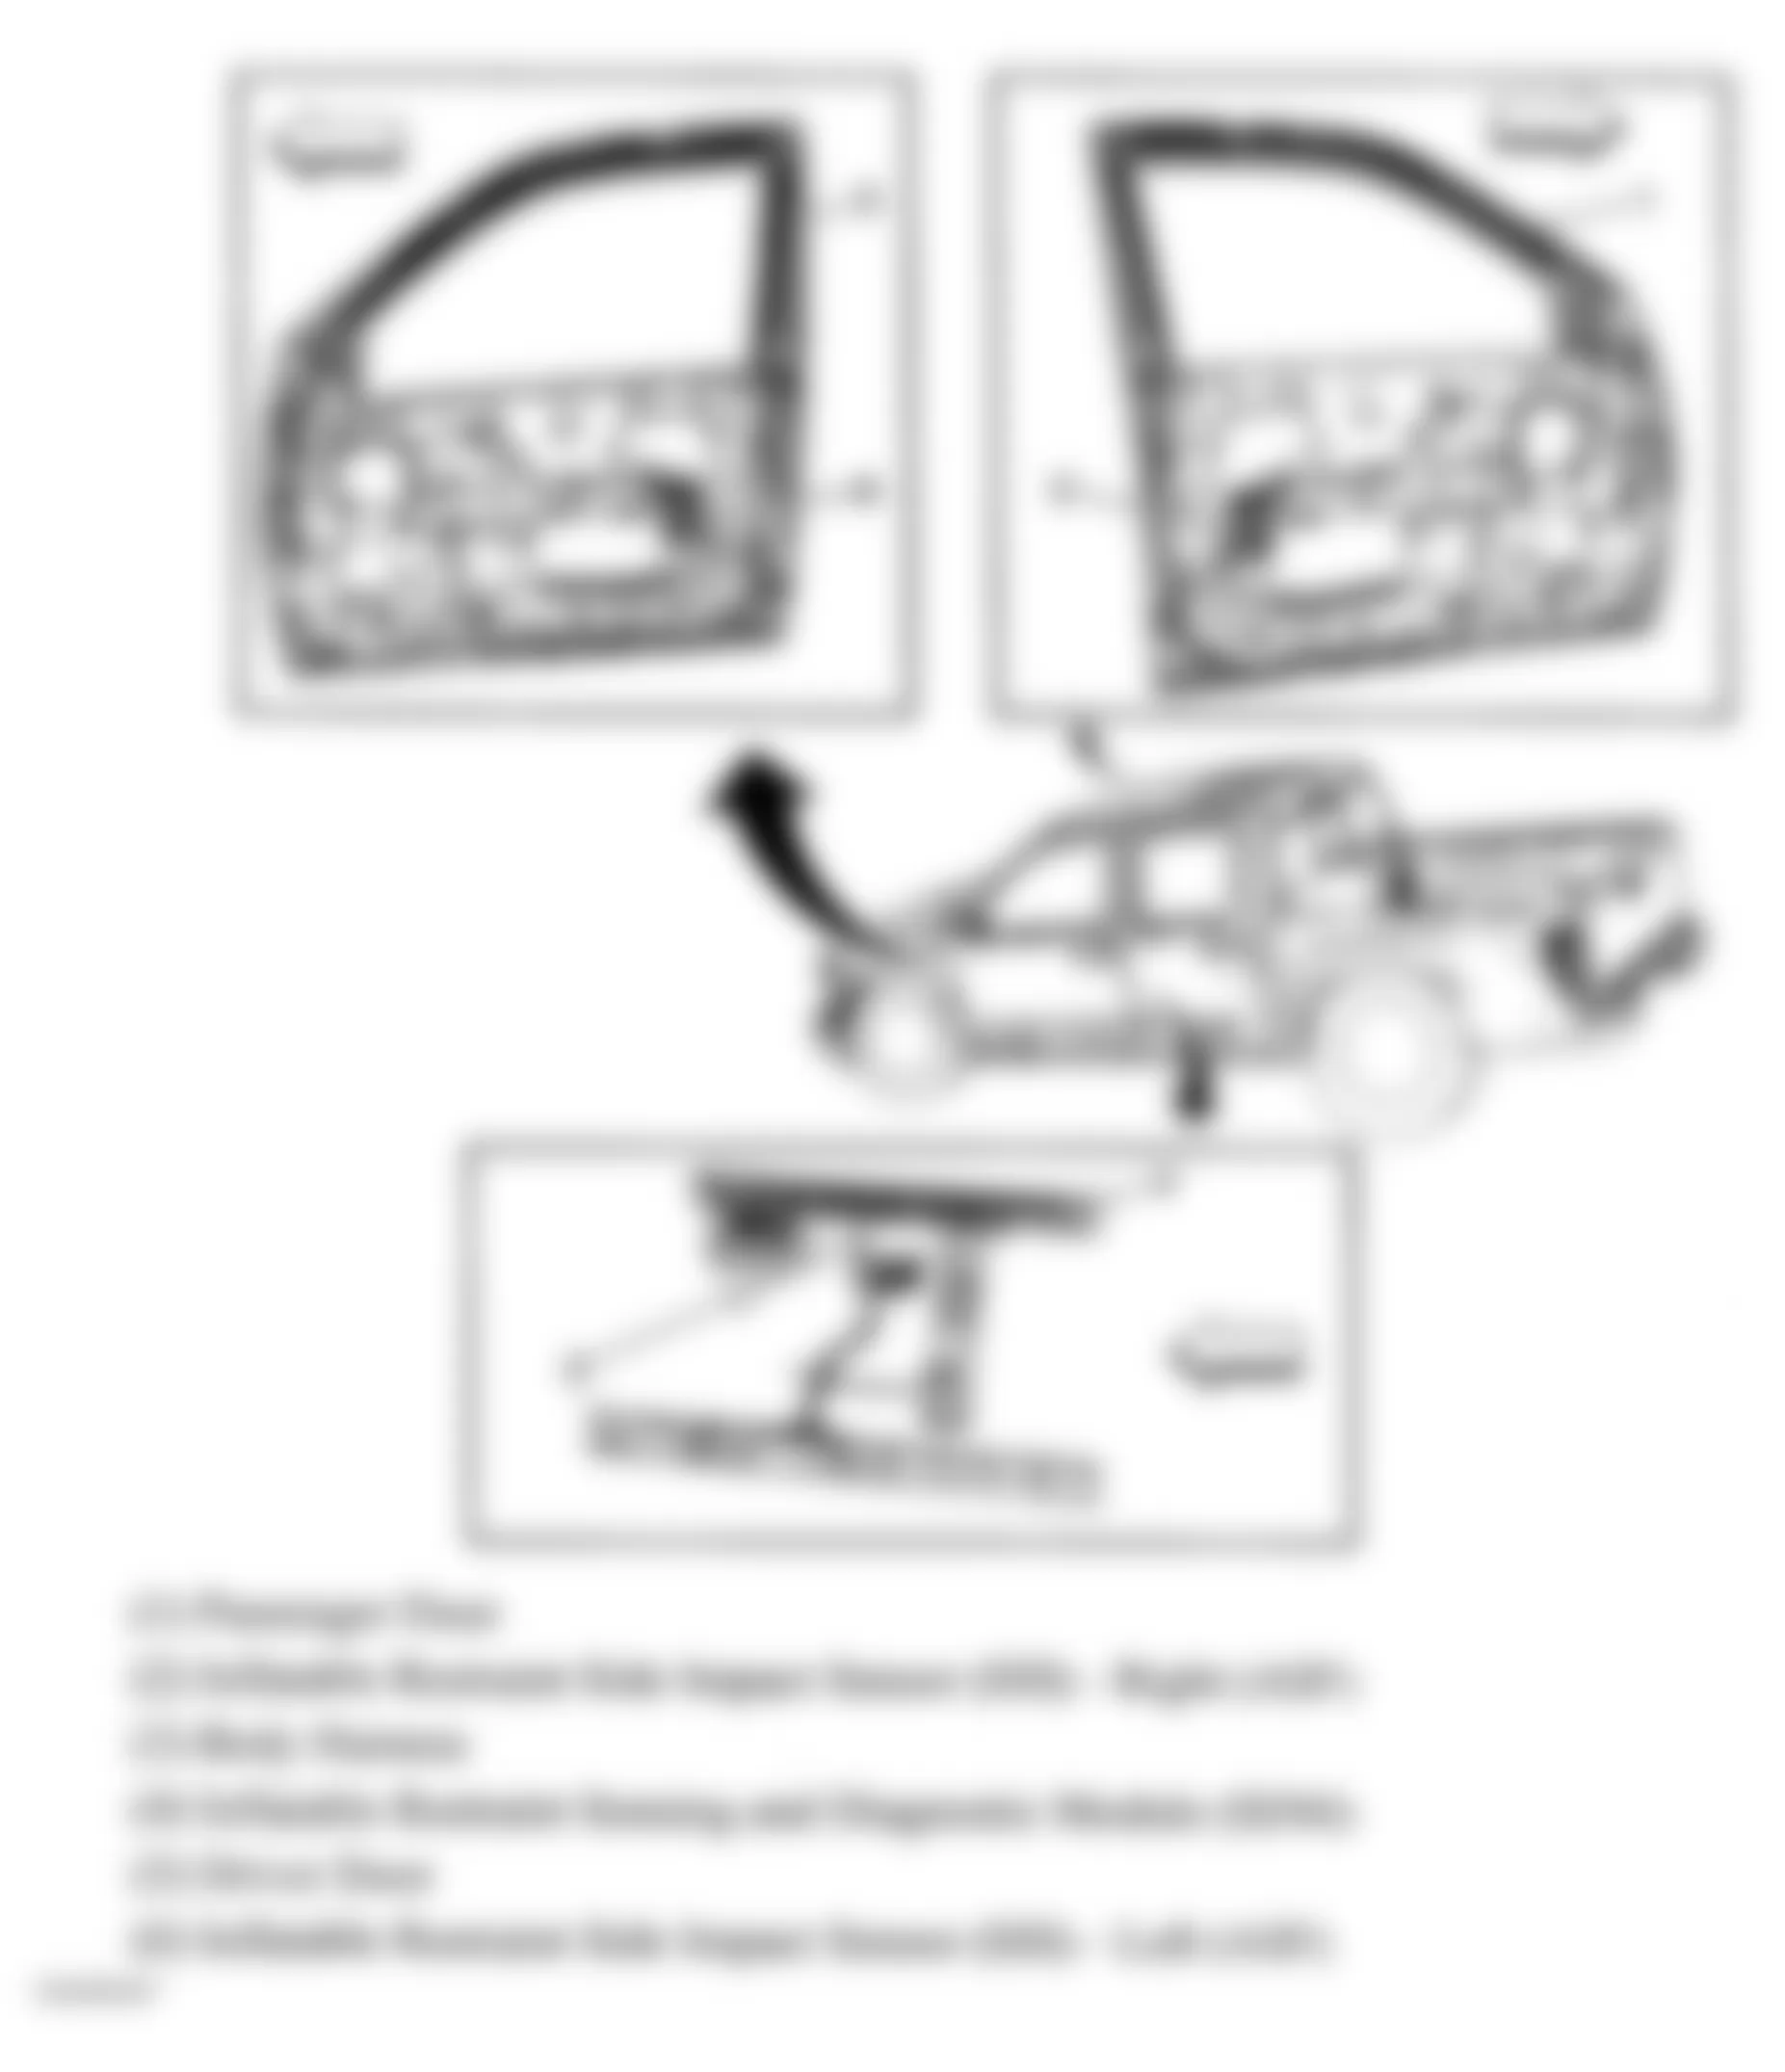 Chevrolet Colorado 2004 - Component Locations -  SIR System Overview